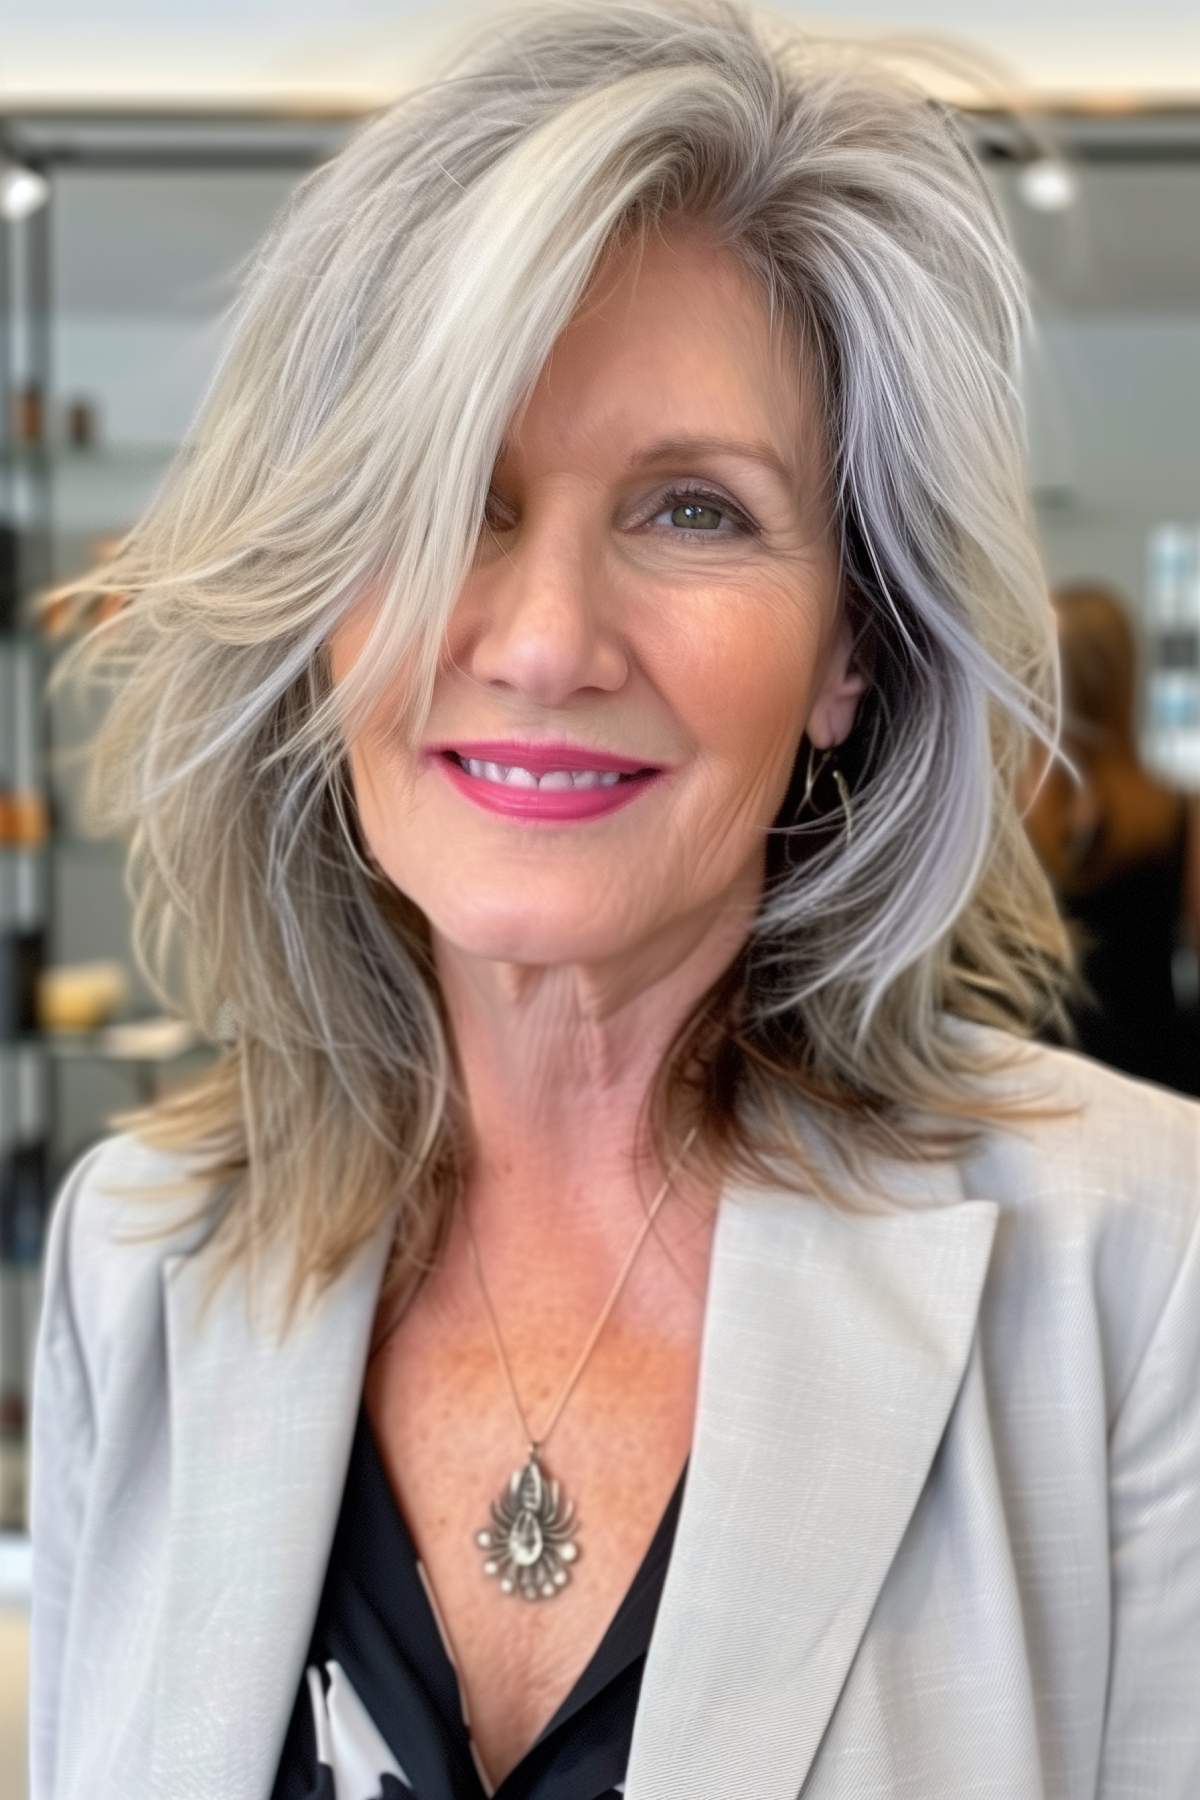 Stylish layered haircut with ash and platinum highlights on a woman over 50, designed to lighten and manage thick hair while maintaining volume.